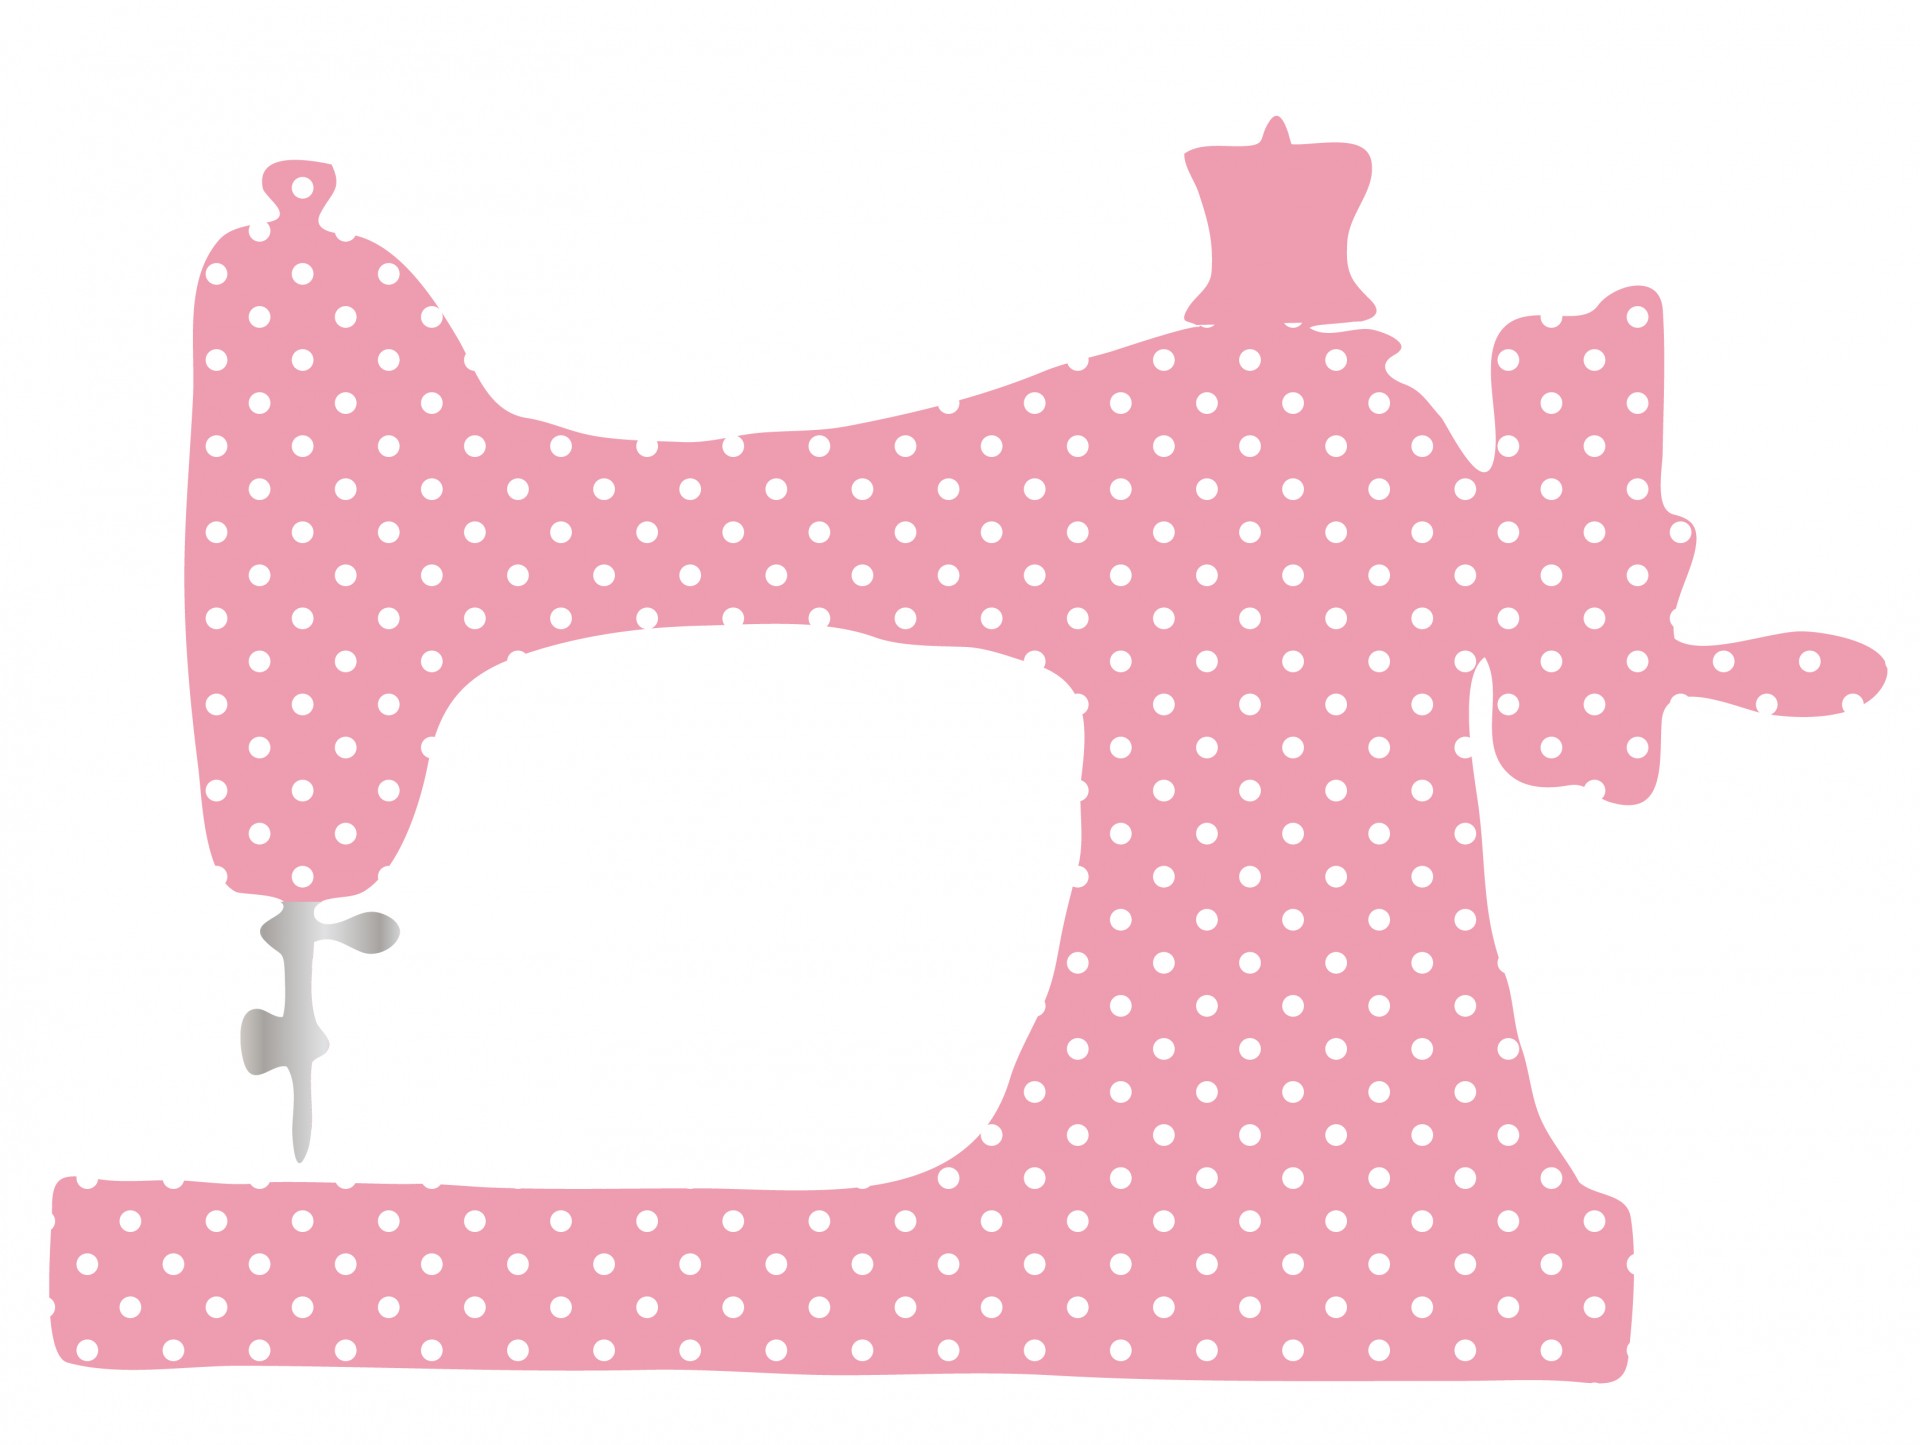 free clipart images sewing - photo #2